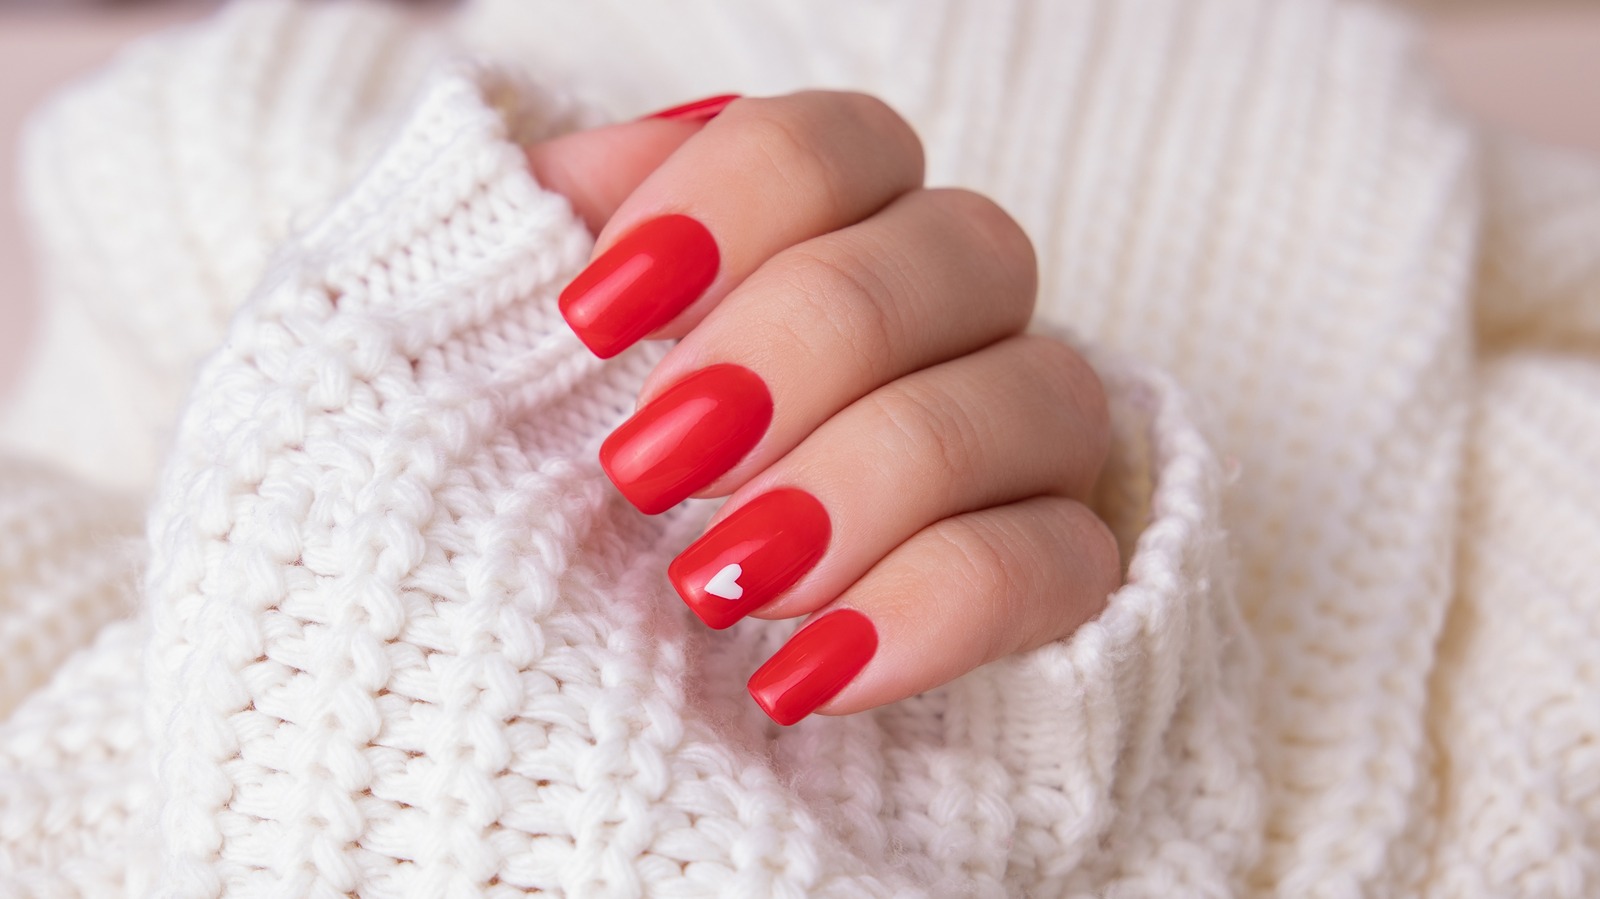 Red And White Nail Art Designs To Try | Nail Designs